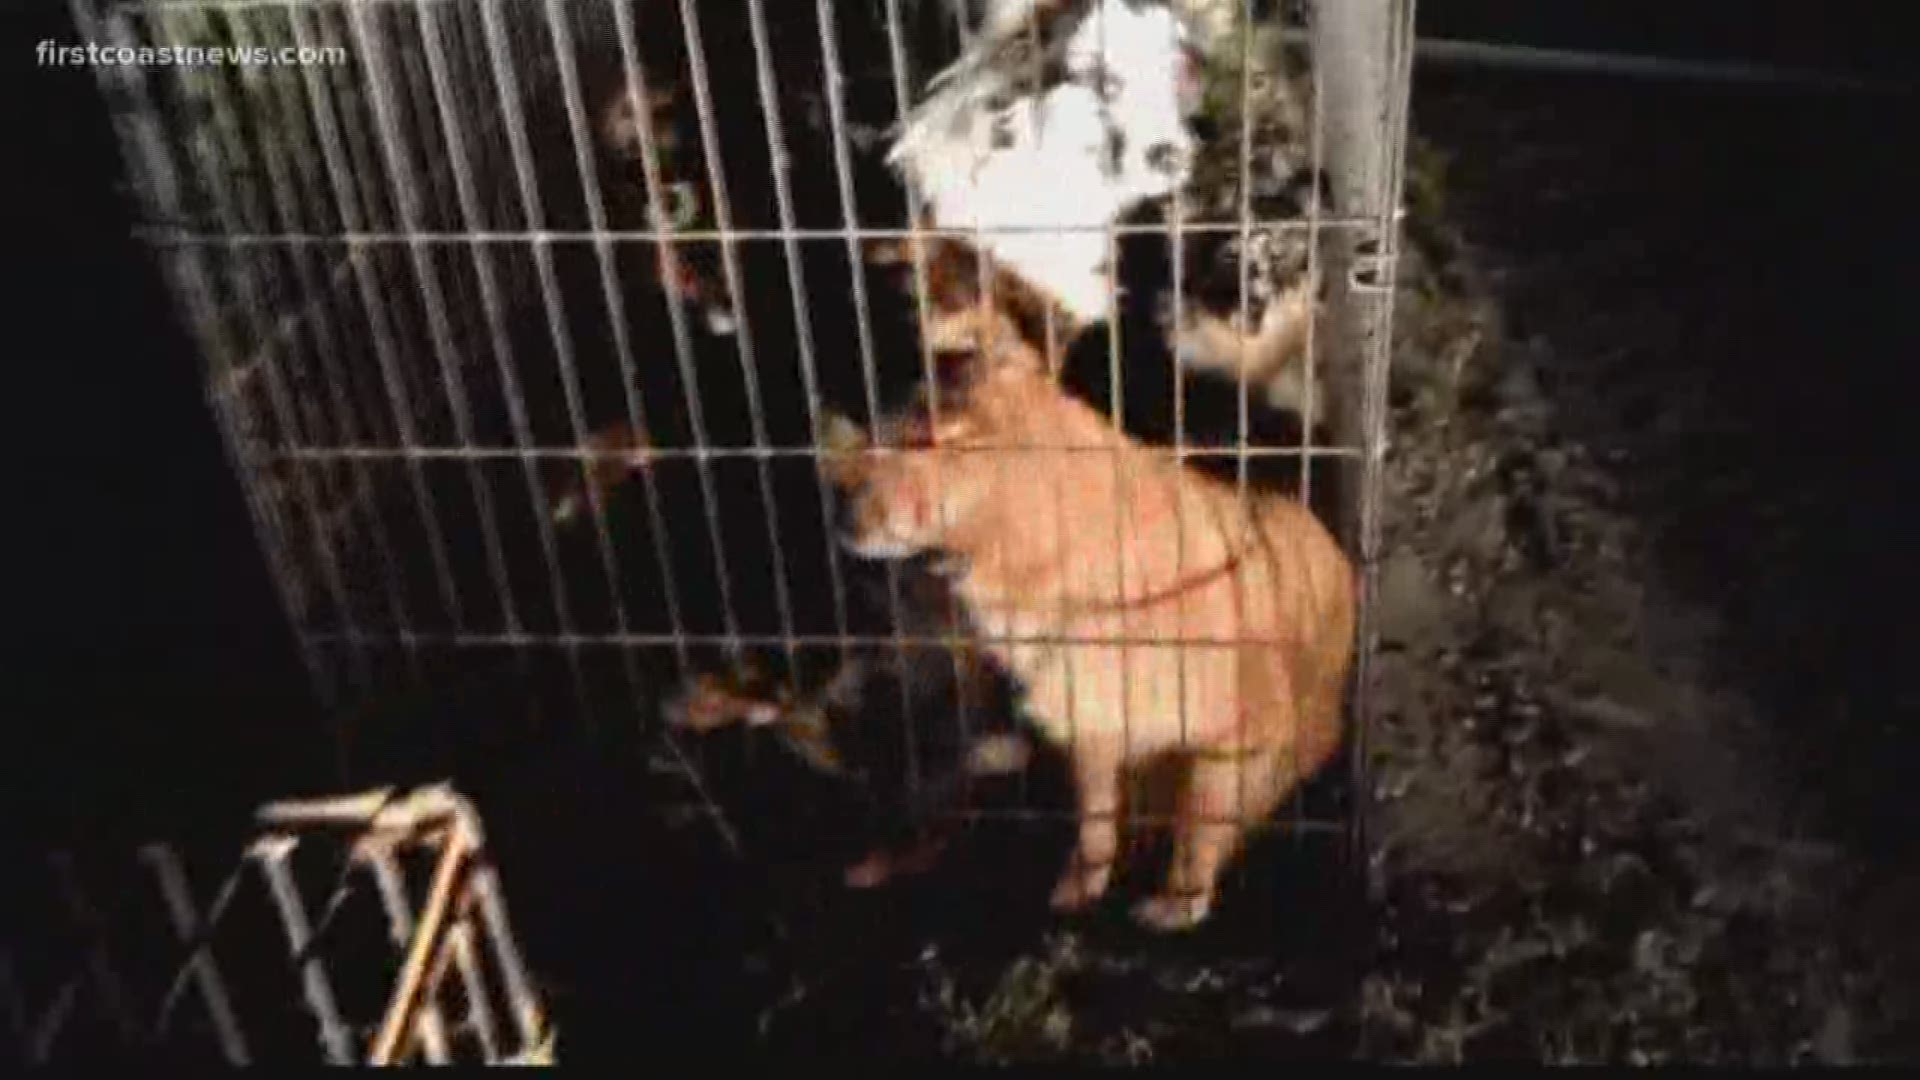 The dogs were dumped outside a shelter in Baker County